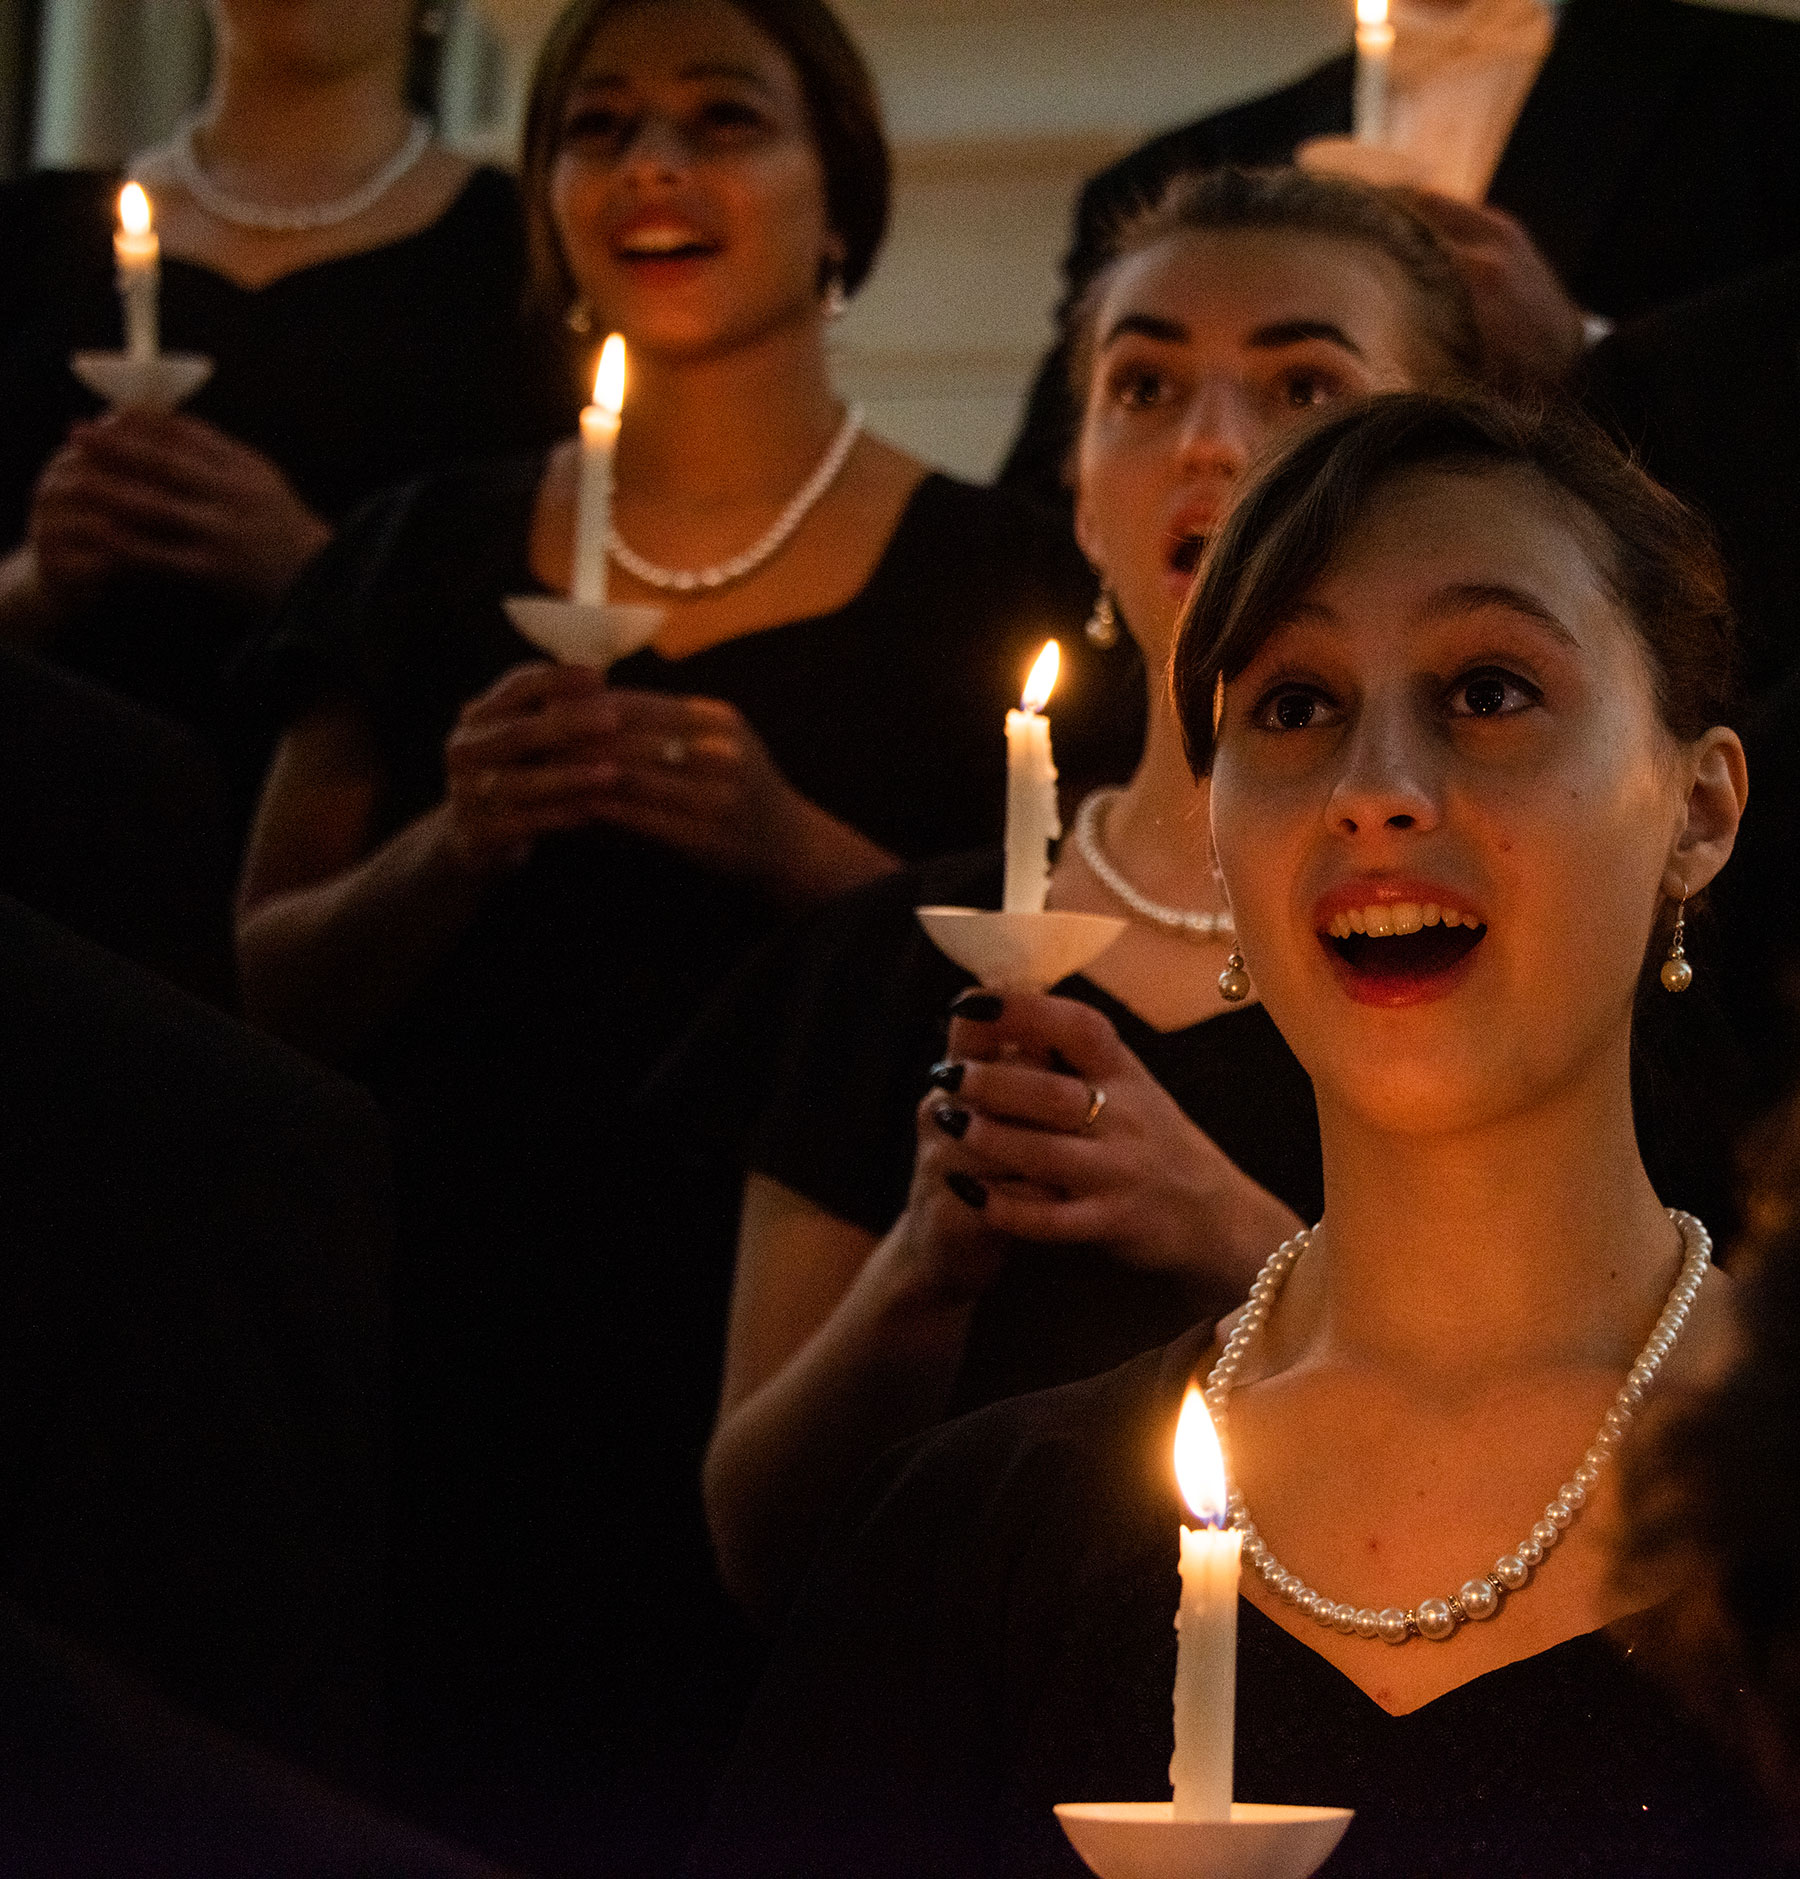 Stetson to Celebrate the Holiday Season with Christmas Candlelight